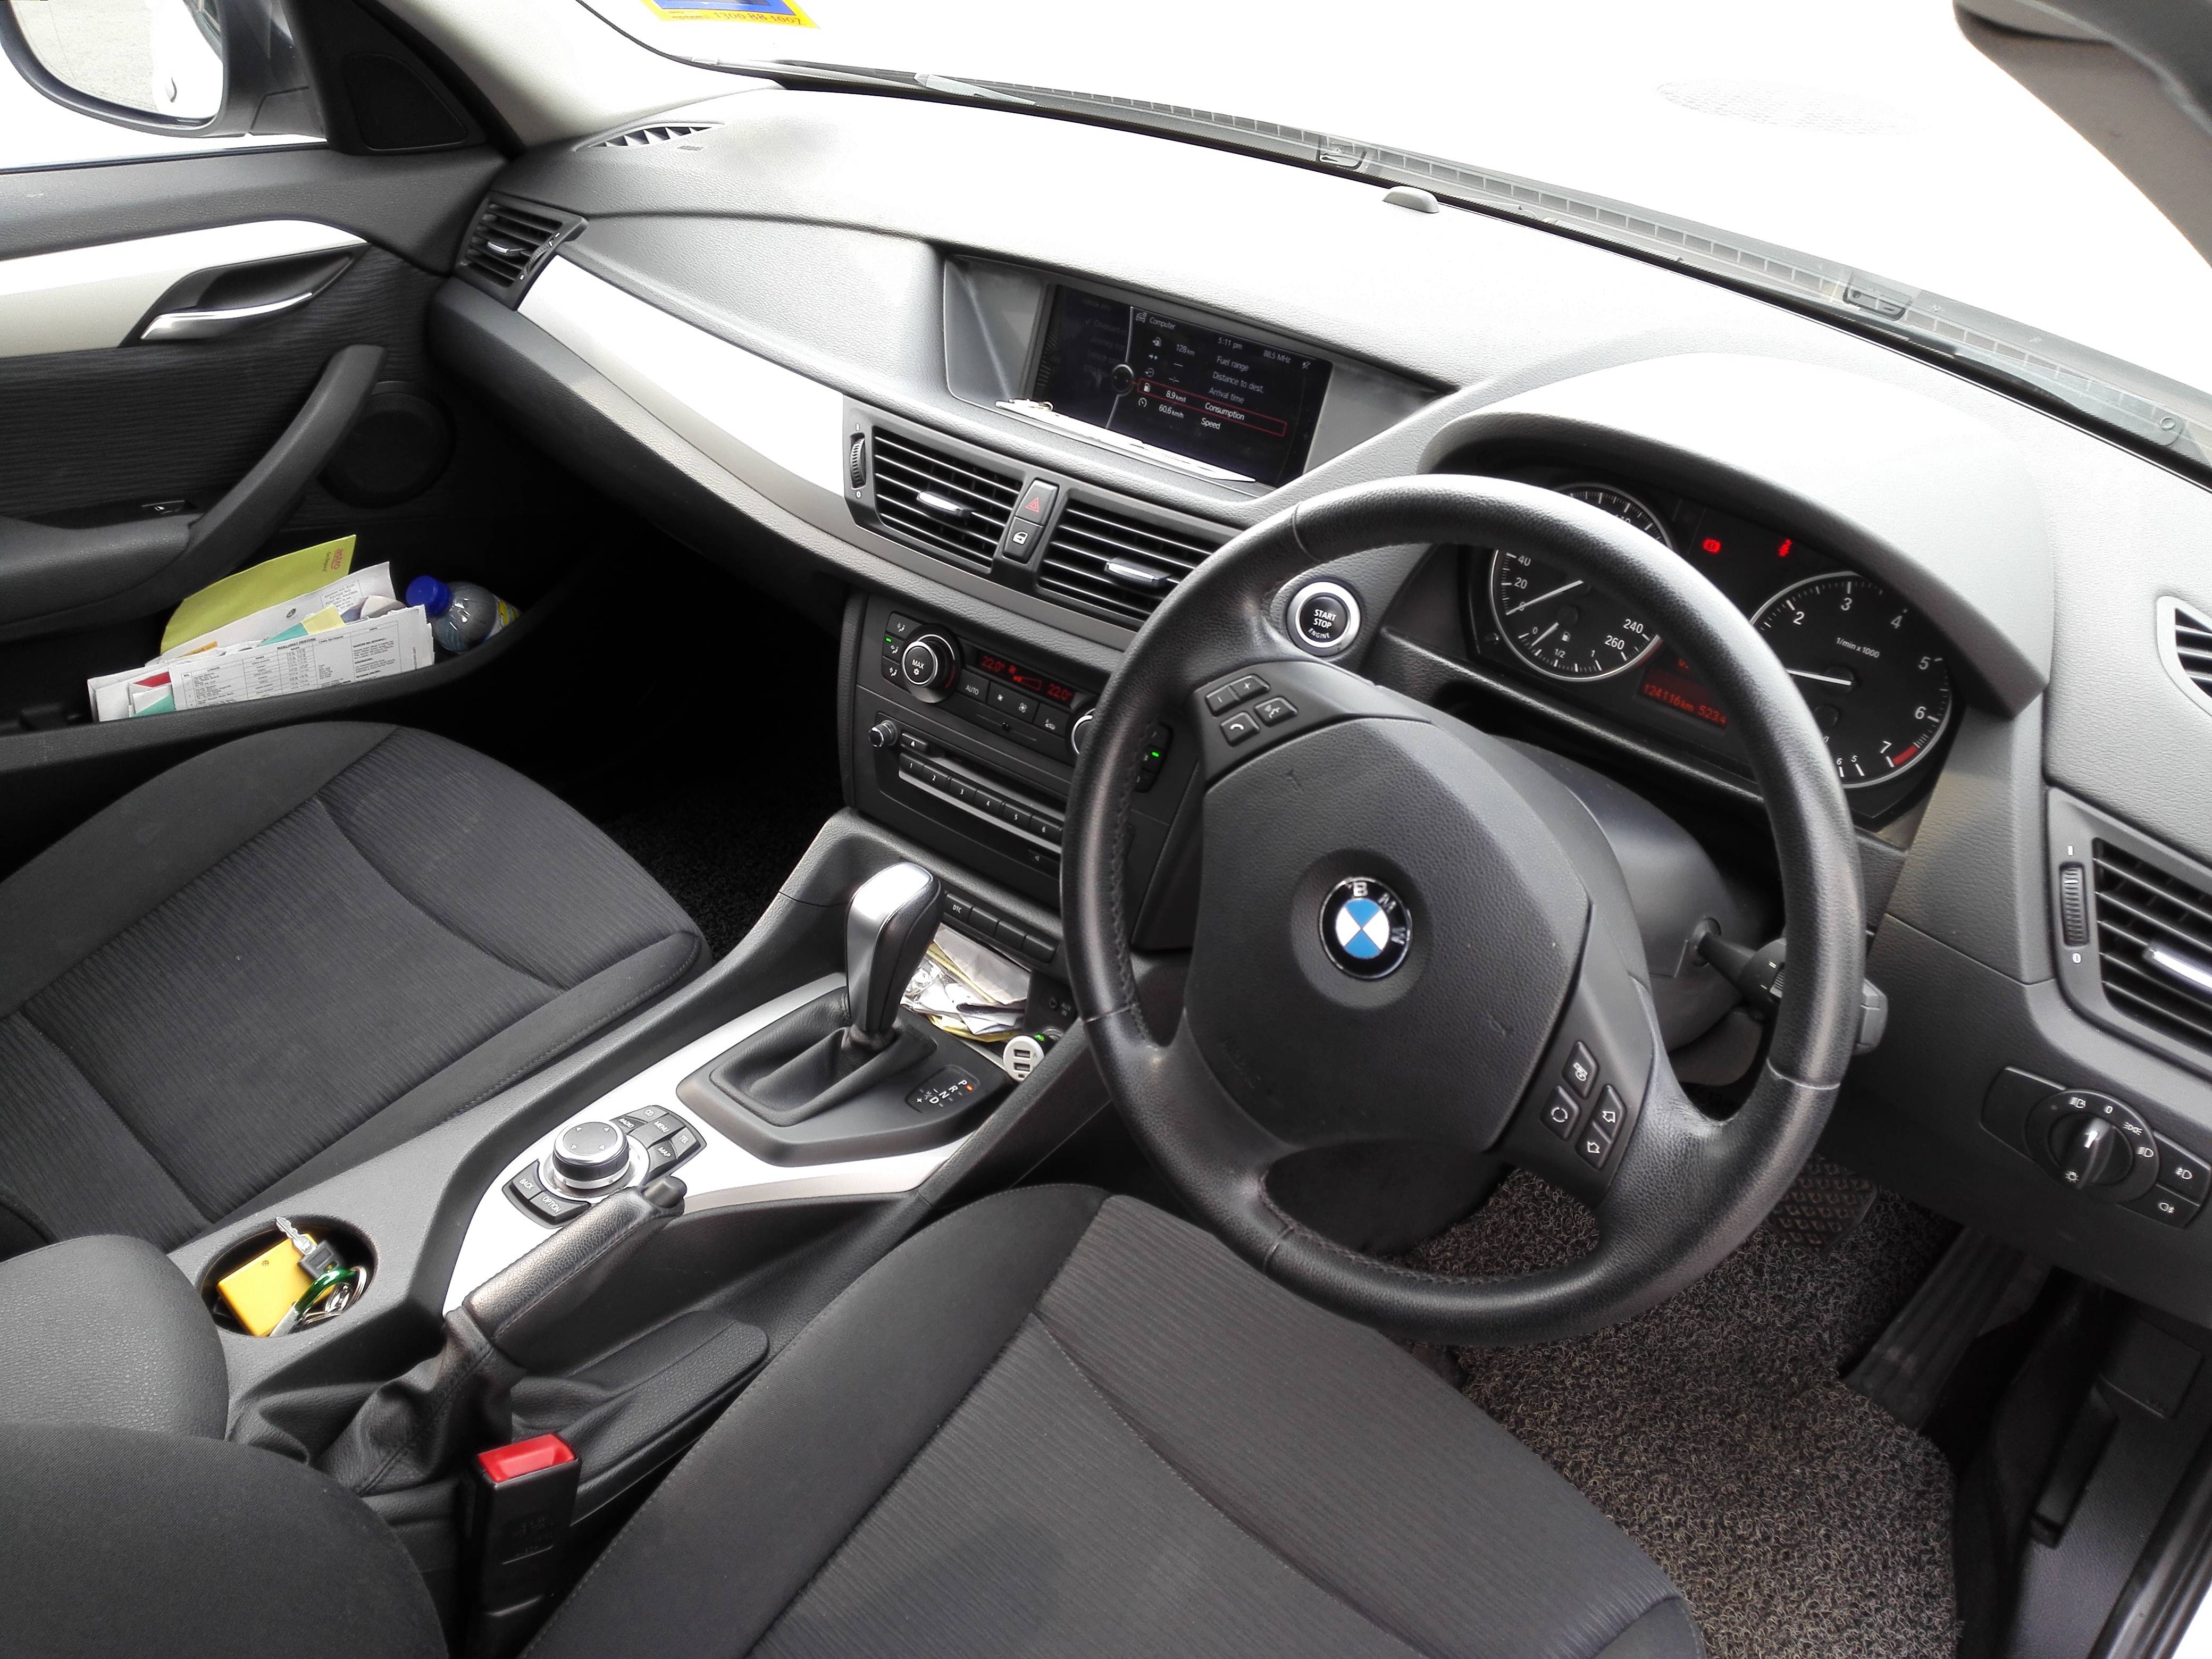 Used 2010 BMW X1 sDrive18i for sale